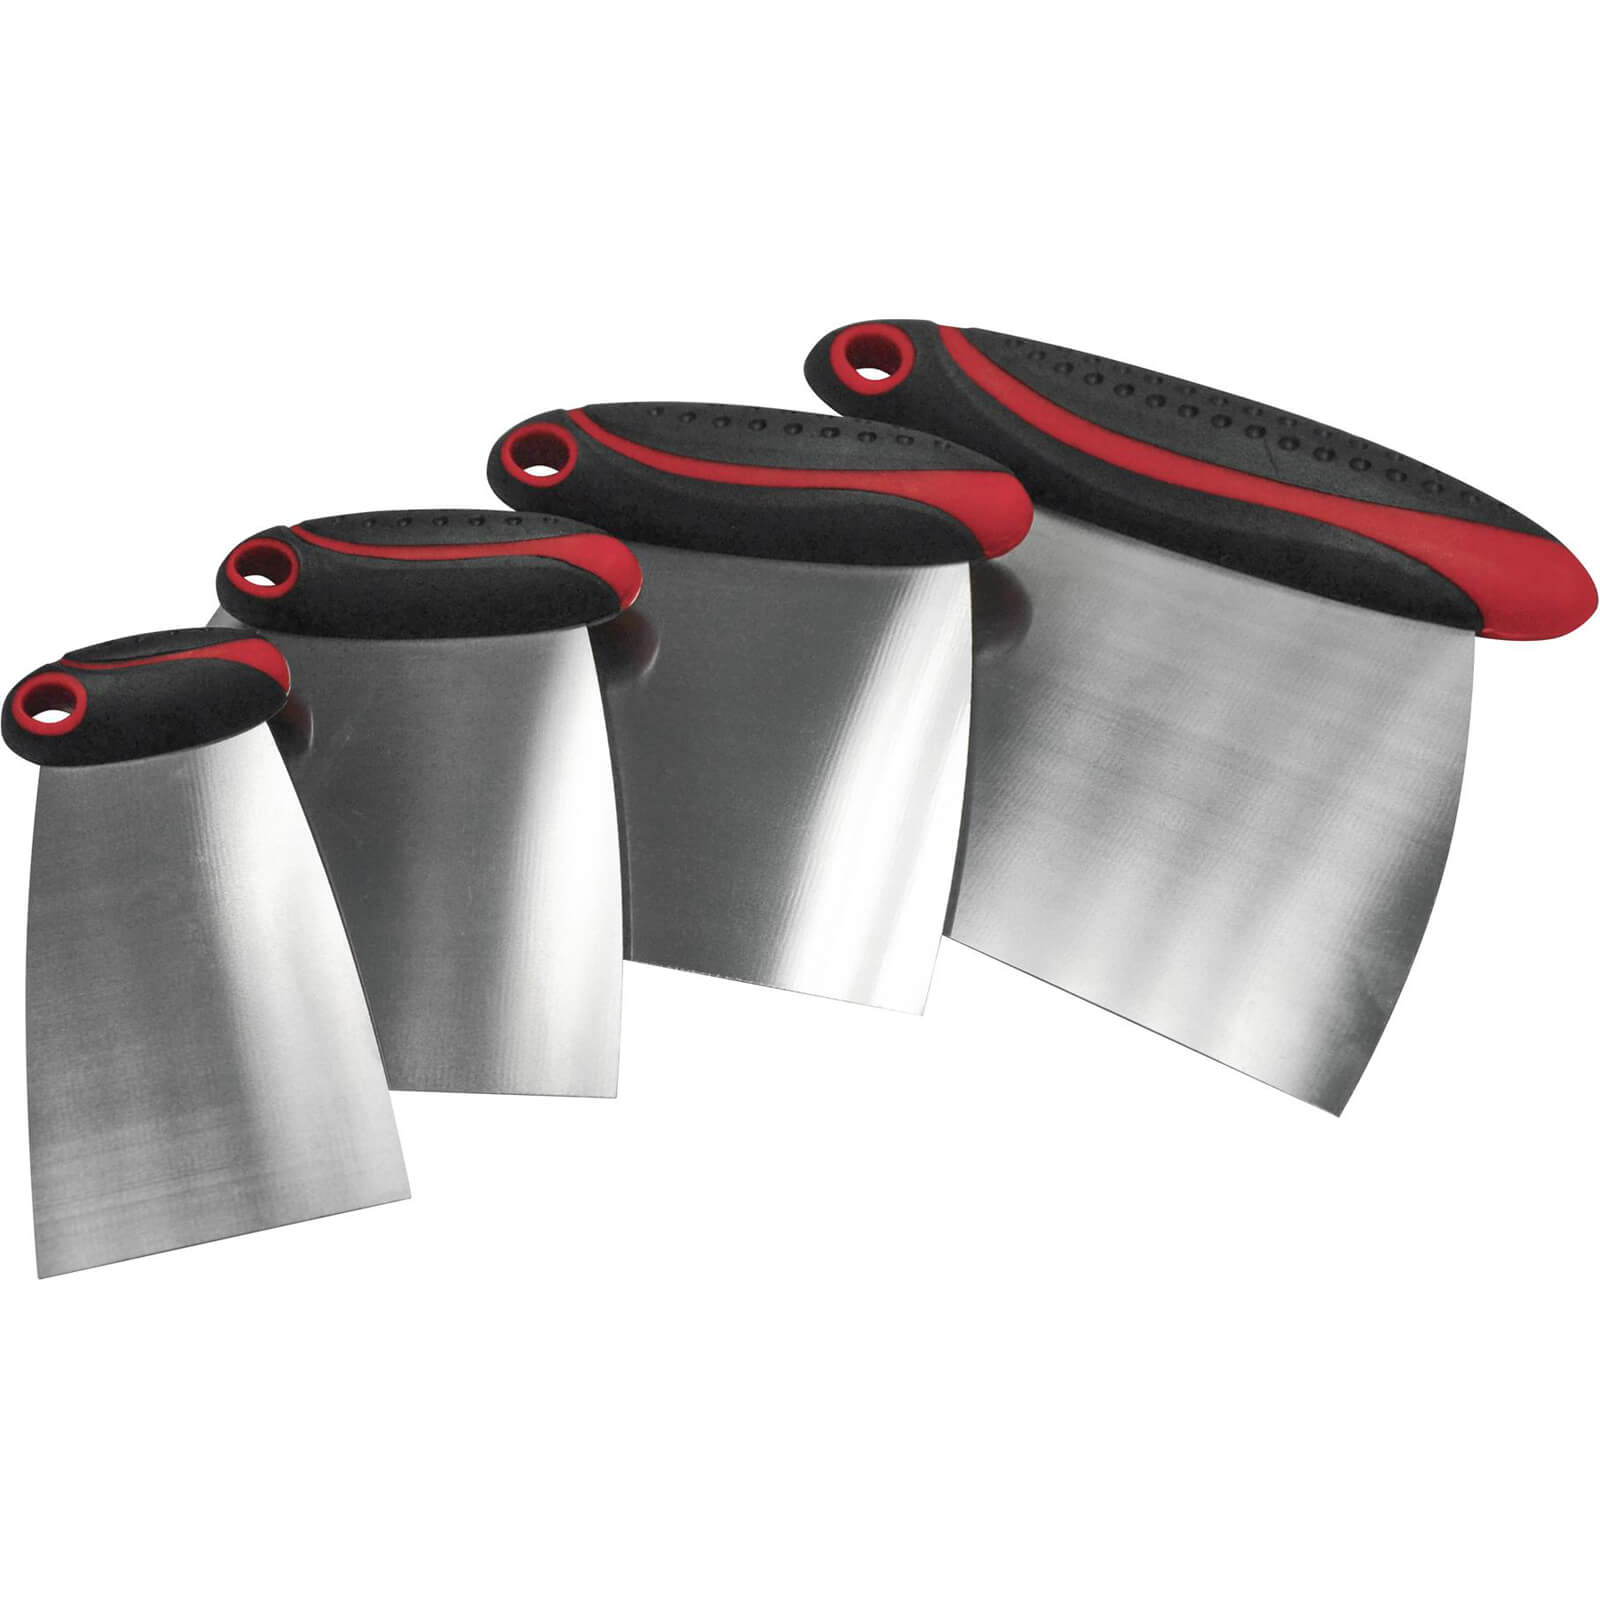 Image of Faithfull 4 Piece Stainless Steel Filler and Spreader Set